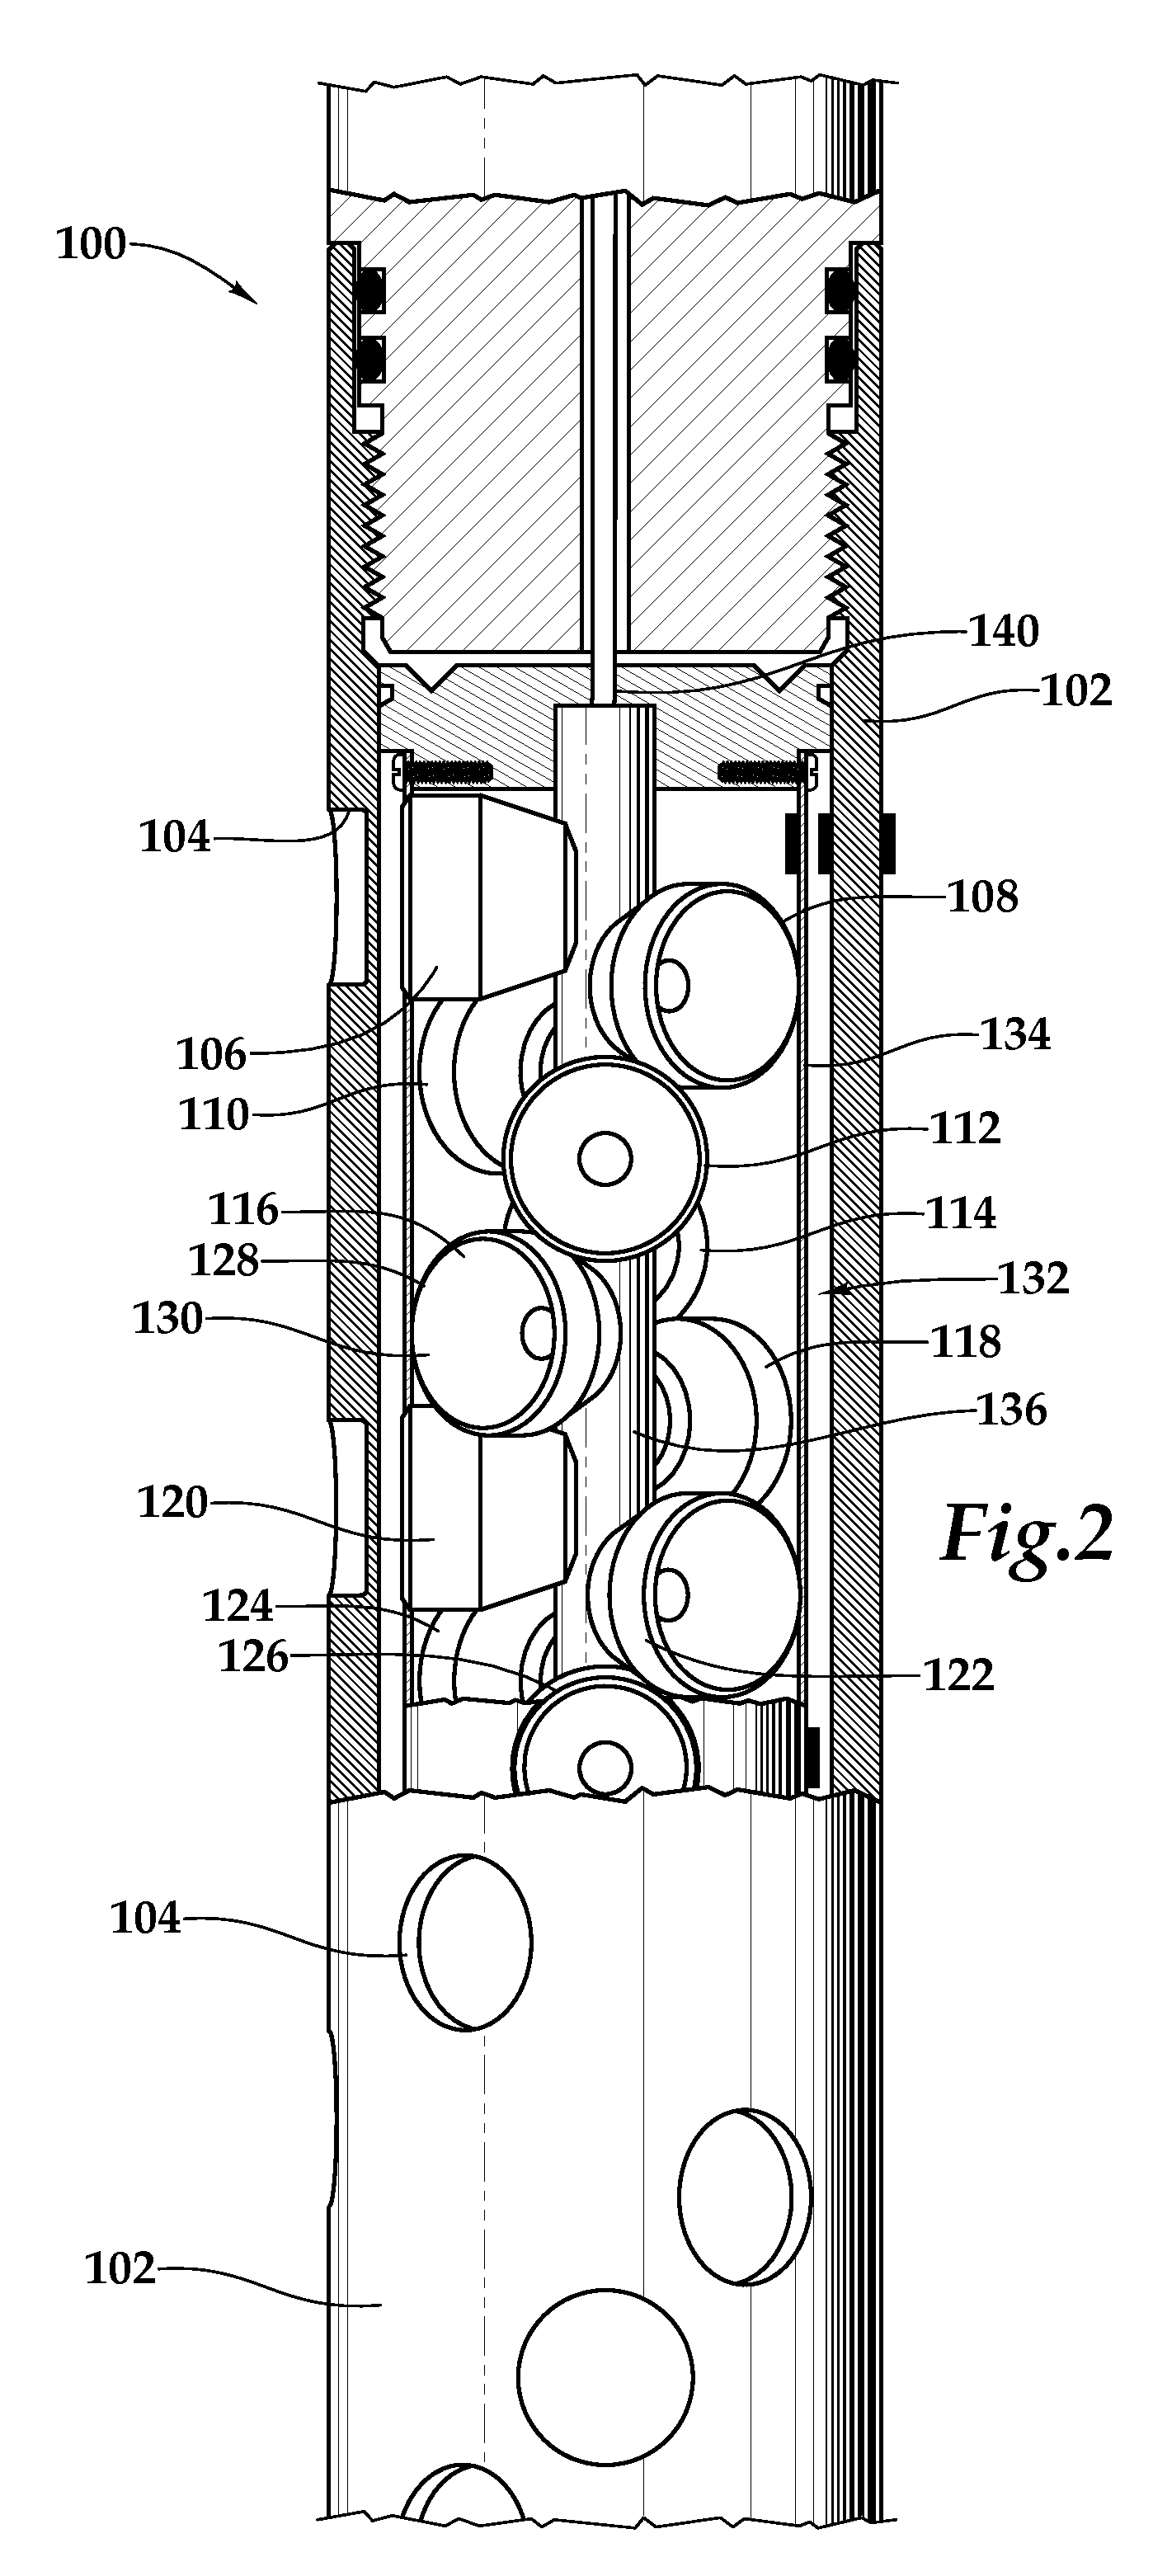 Perforating Gun Assembly and Method for Controlling Wellbore Pressure Regimes During Perforating